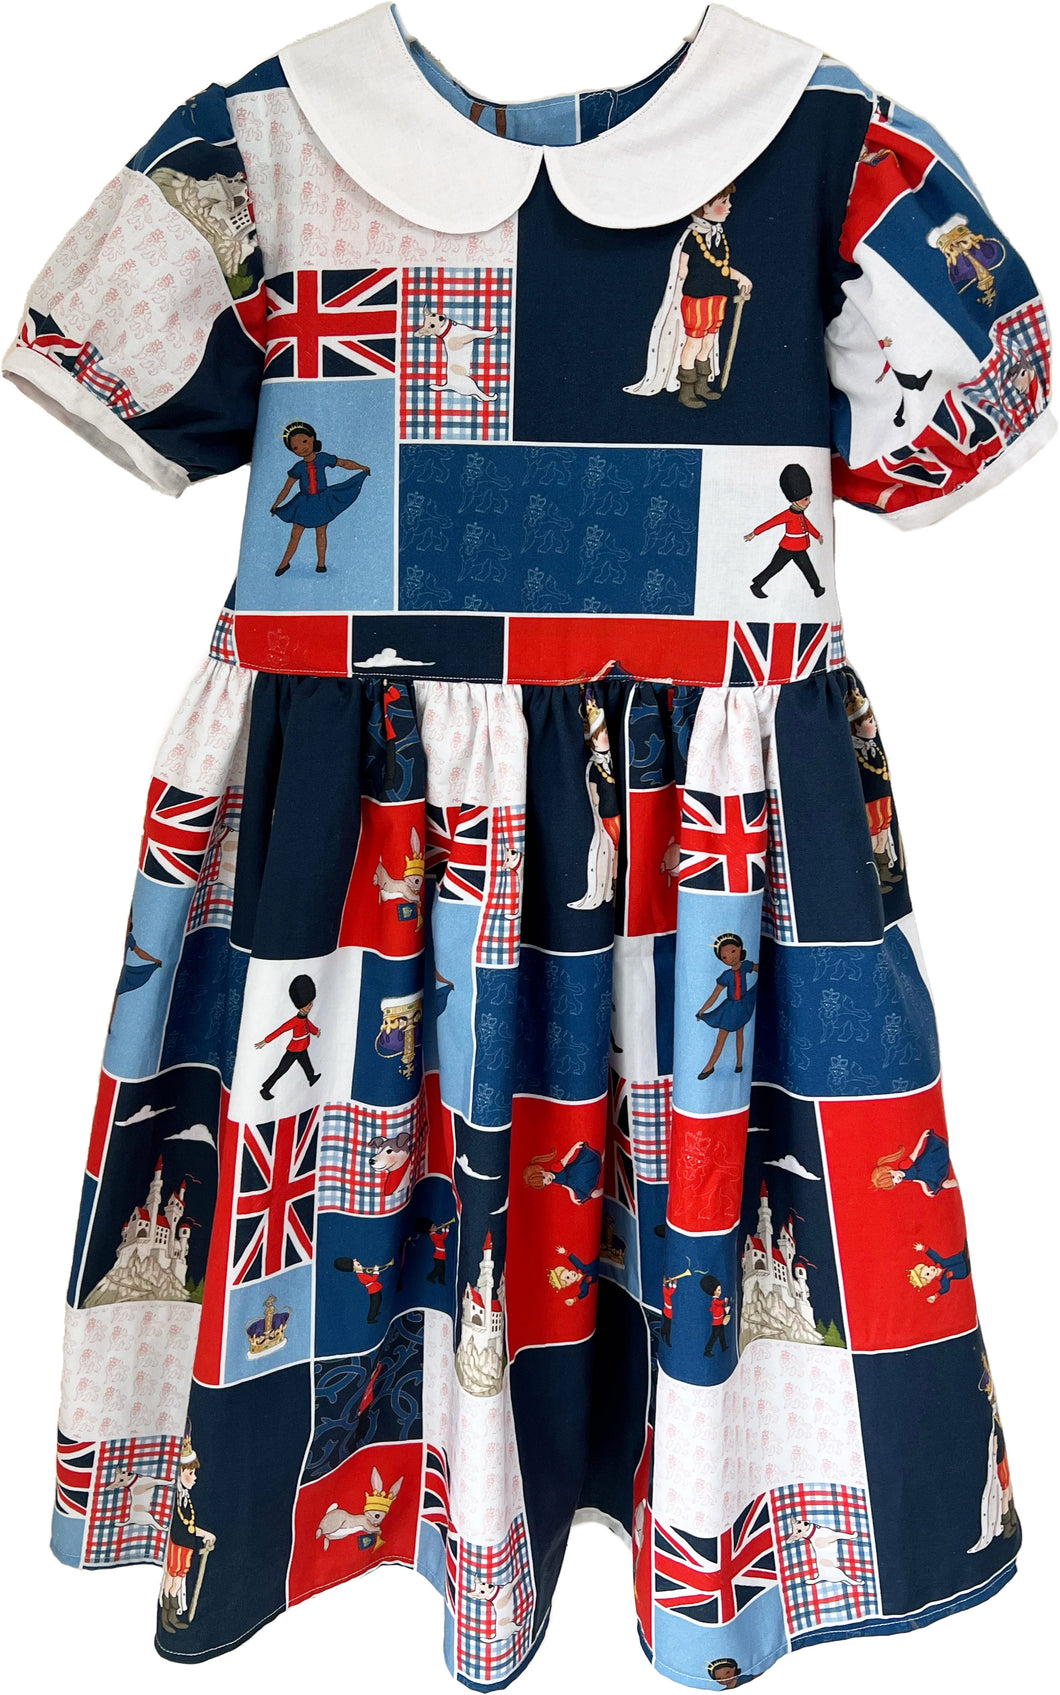 Made to Order Child's Coronation Party Dress Sizes 18m-7y